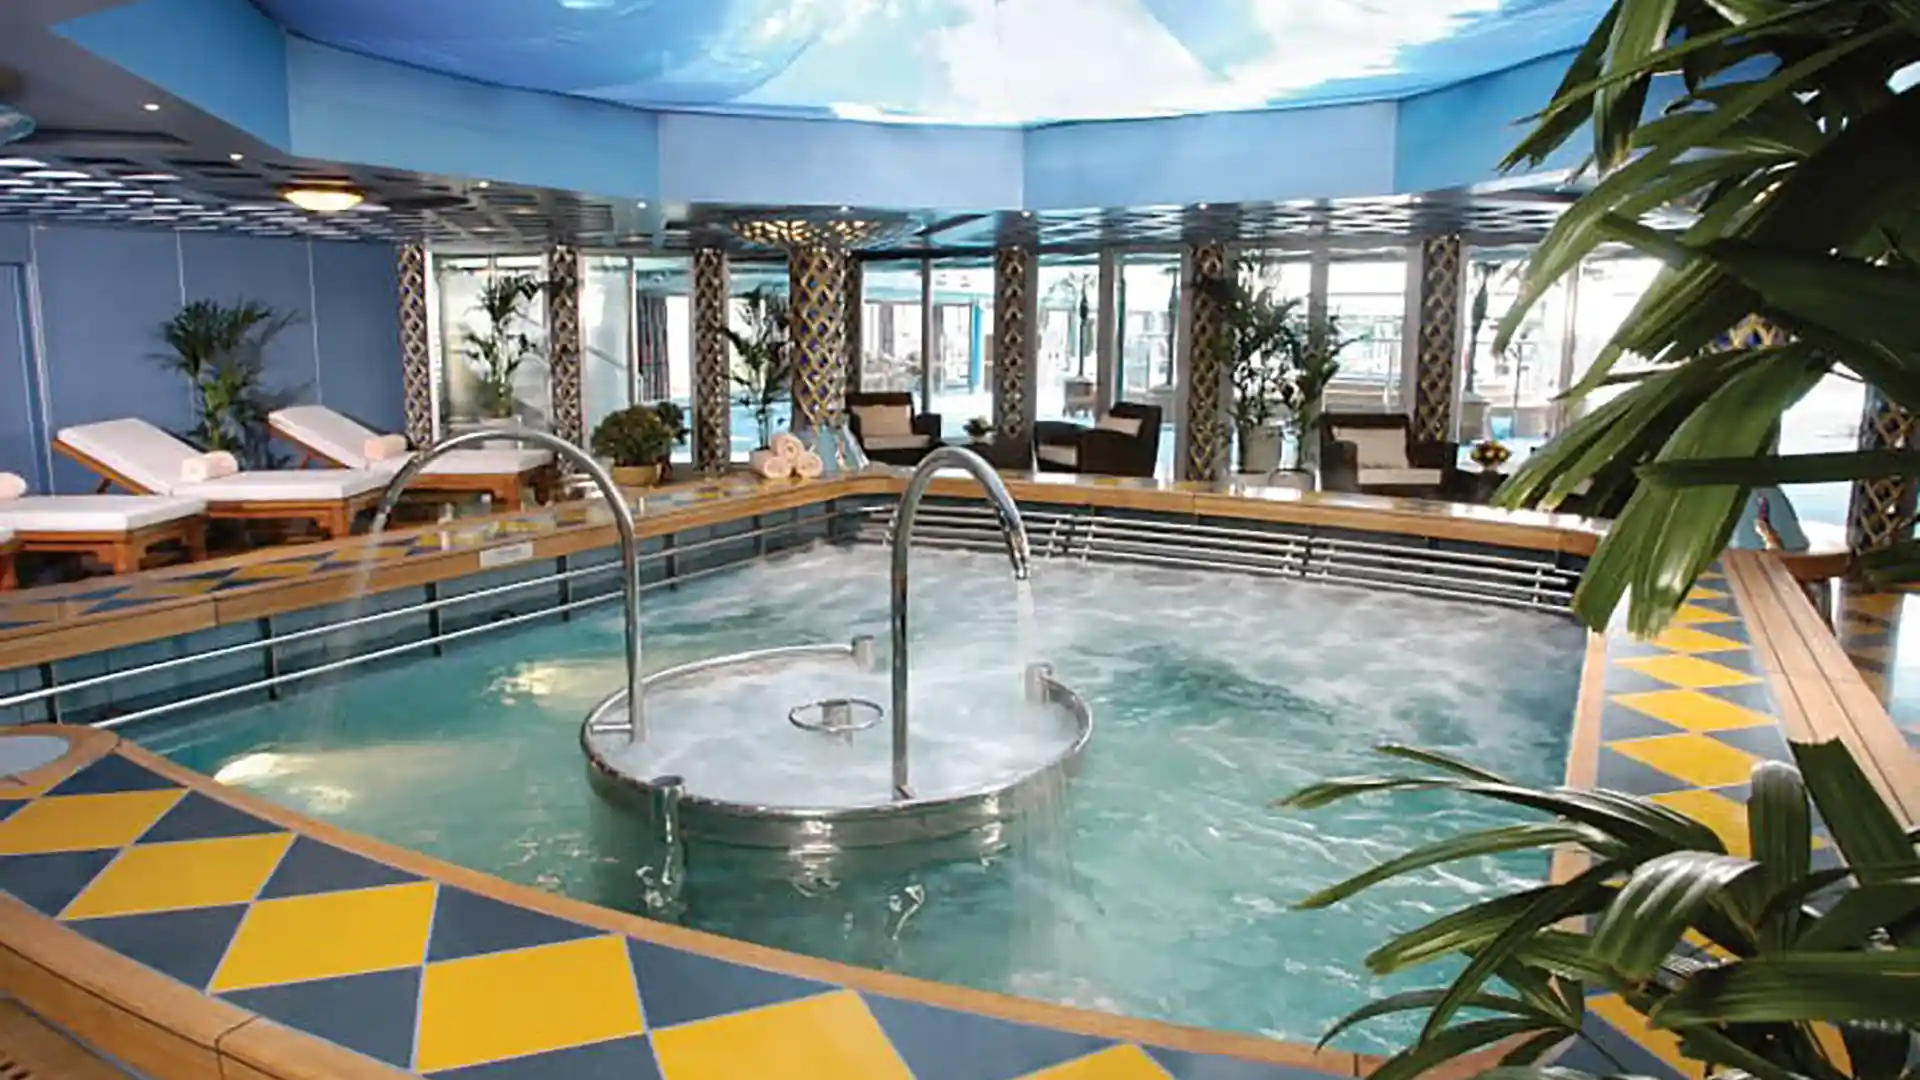 View of hydropool in spa on Holland America Line cruise ship.